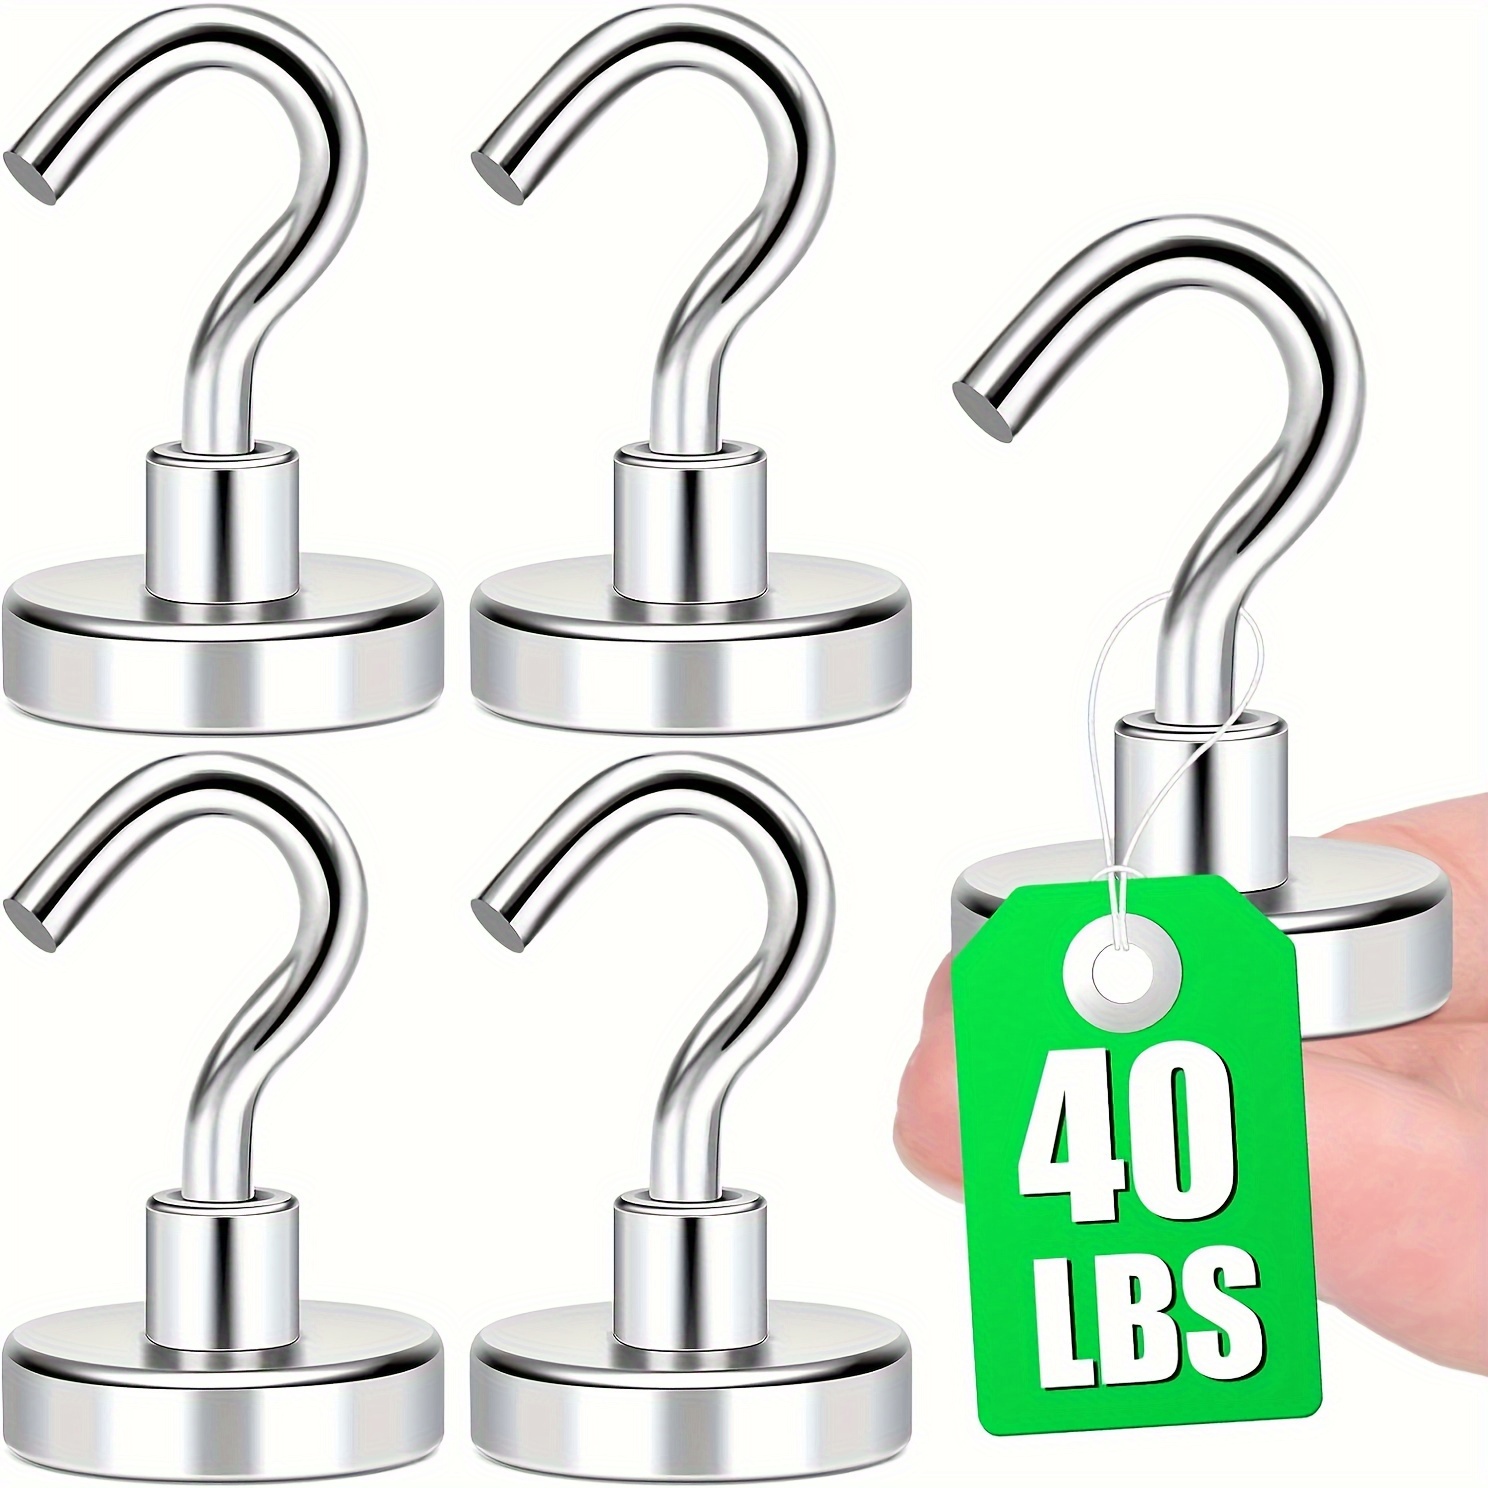 

5pcs Magnetic Hooks Heavy Duty, 40 Lbs (approx. 18.1kg) Magnet With Hook, Rust Resistant Metal Hook For Cruise Ship Cabins, Warehouses, Outdoor